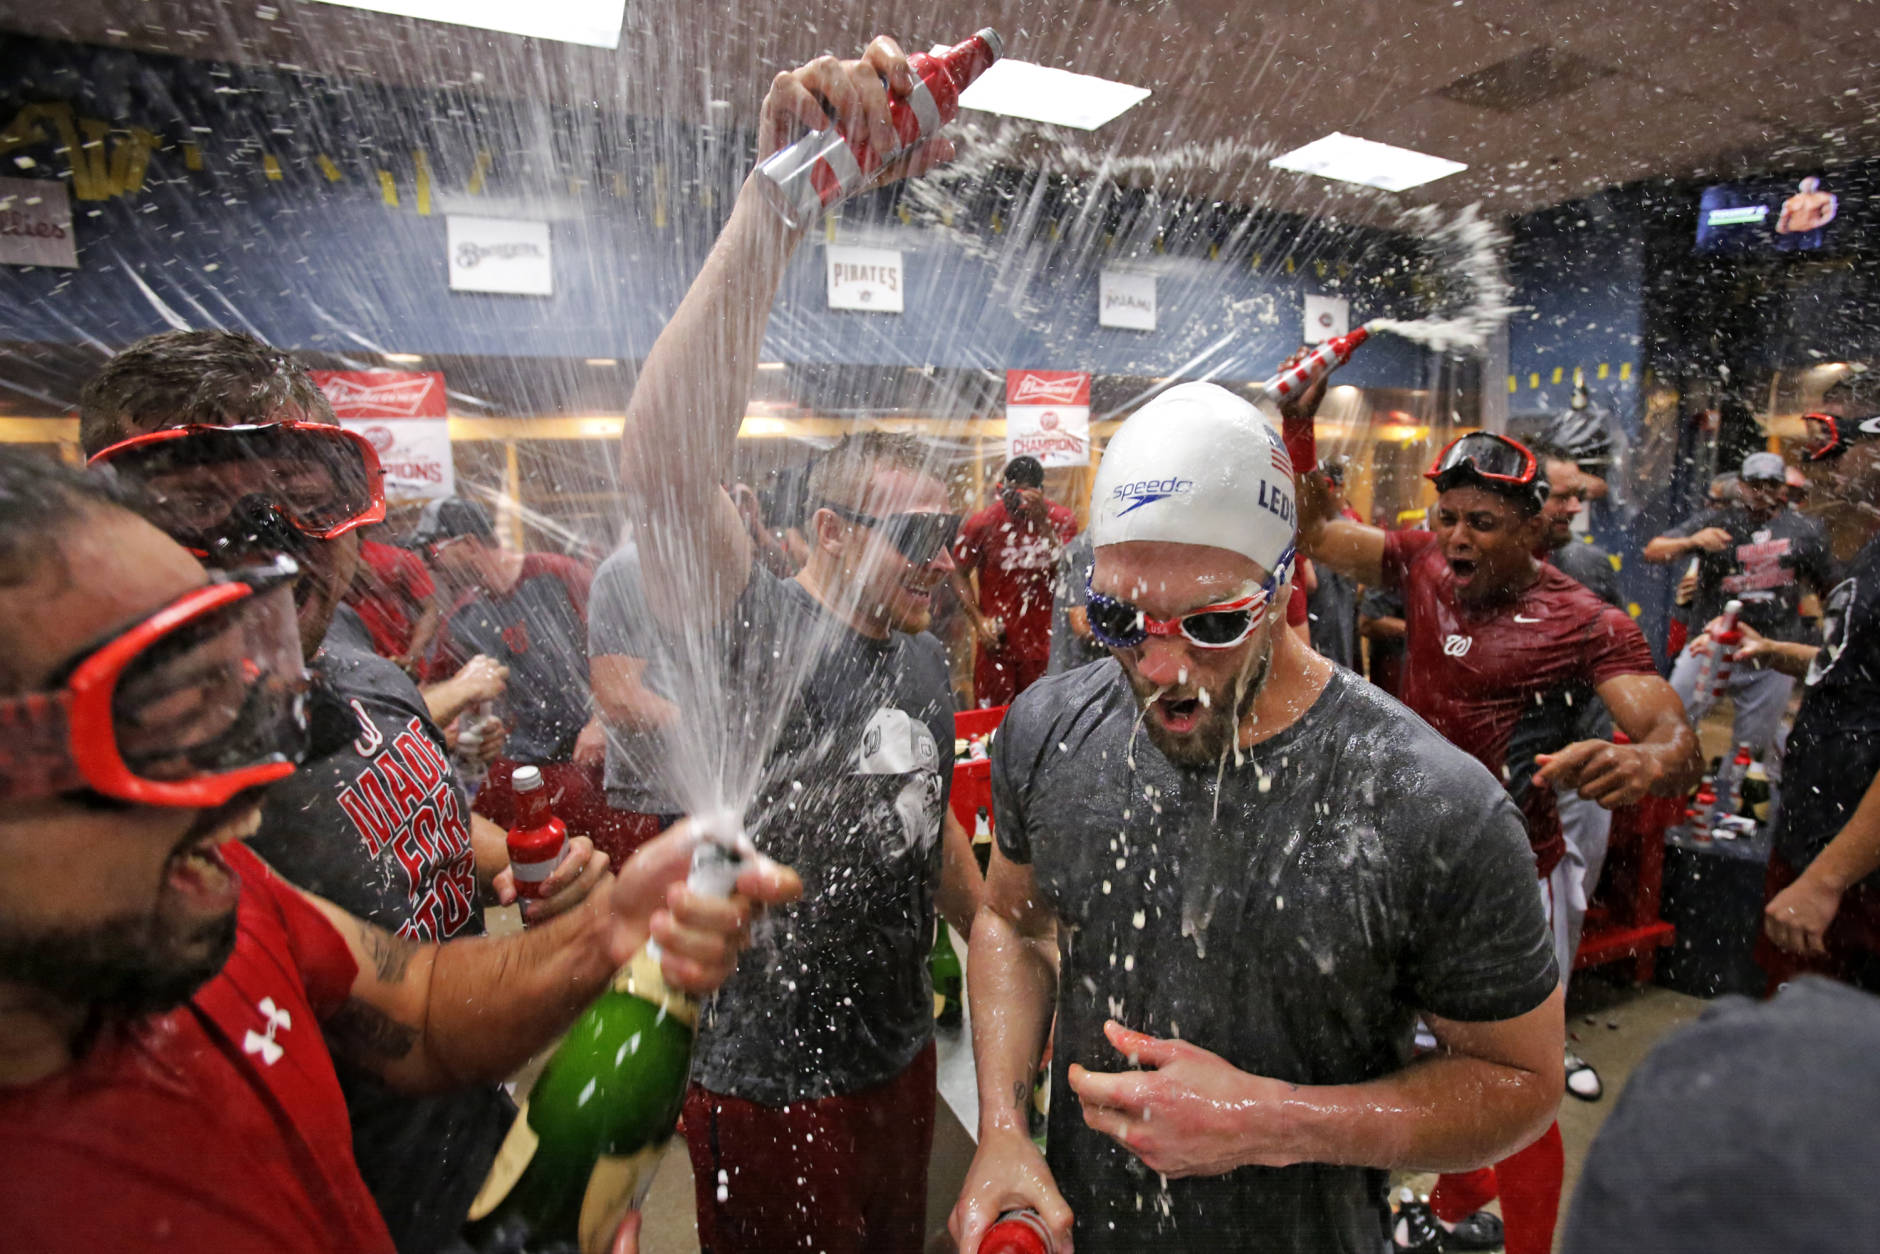 Washington Nationals' Bryce Harper, right, and Anthony Rendon, left, and Mark Melancon, center, celebrate after clinching the National League East following a  6-1 win over the Pittsburgh Pirates in a baseball game in Pittsburgh, Saturday, Sept. 24, 2016. (AP Photo/Gene J. Puskar)